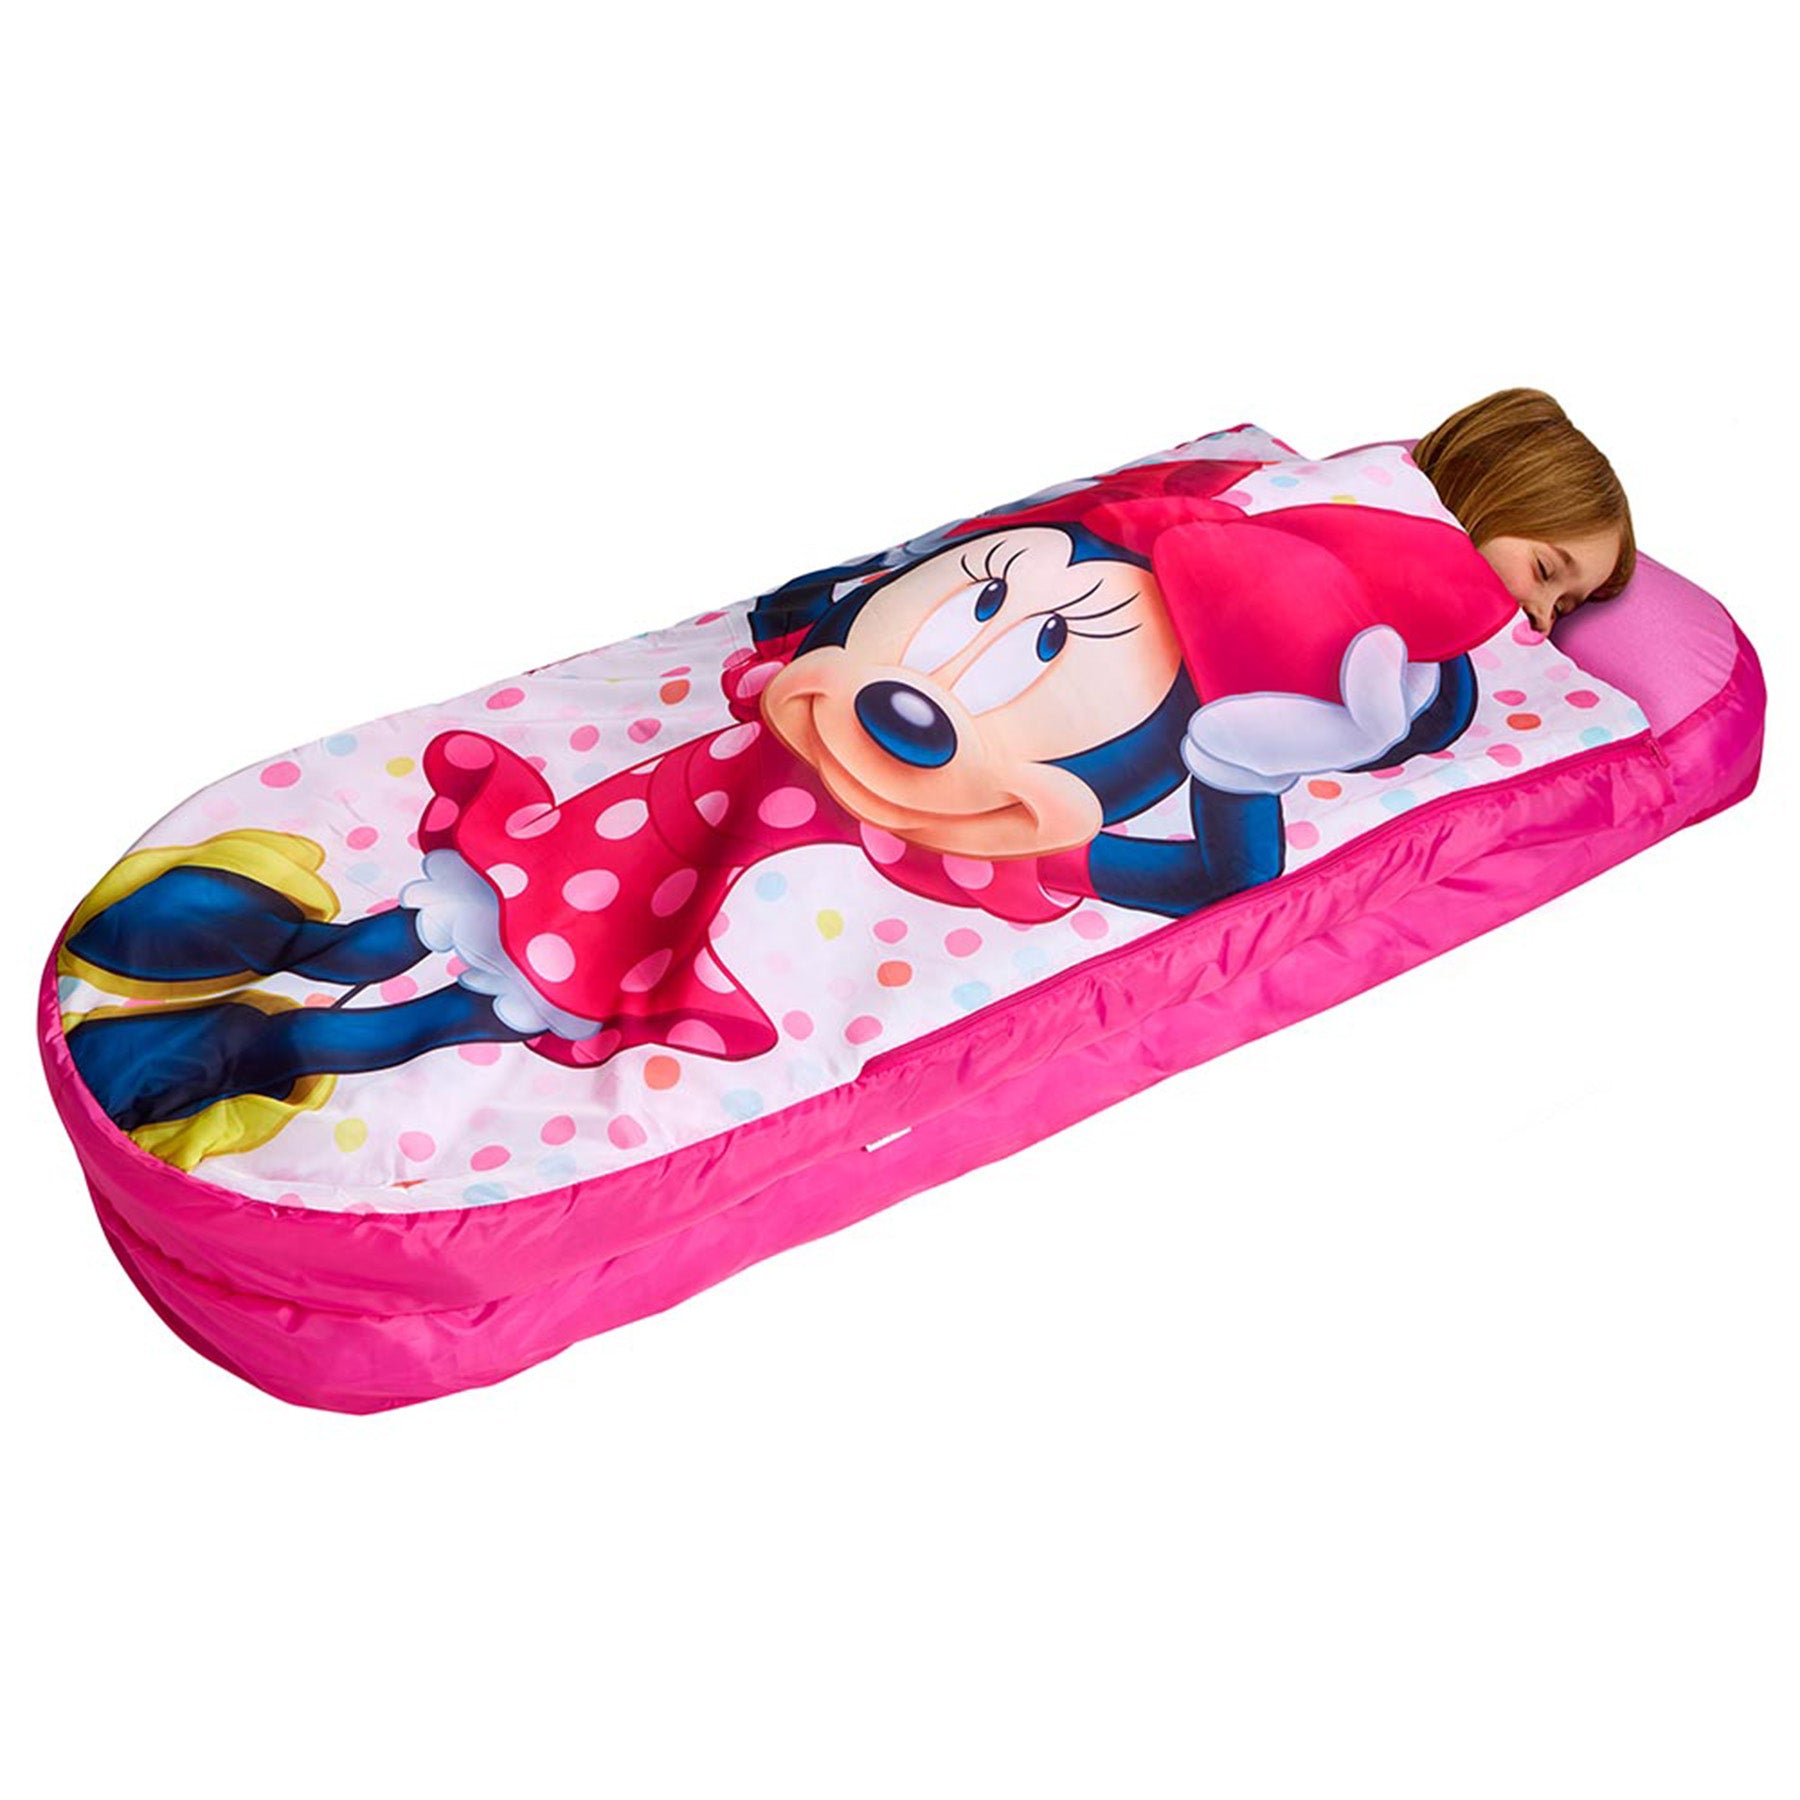 2 in 1 Minnie mouse sleeping bag & inflatable air bed